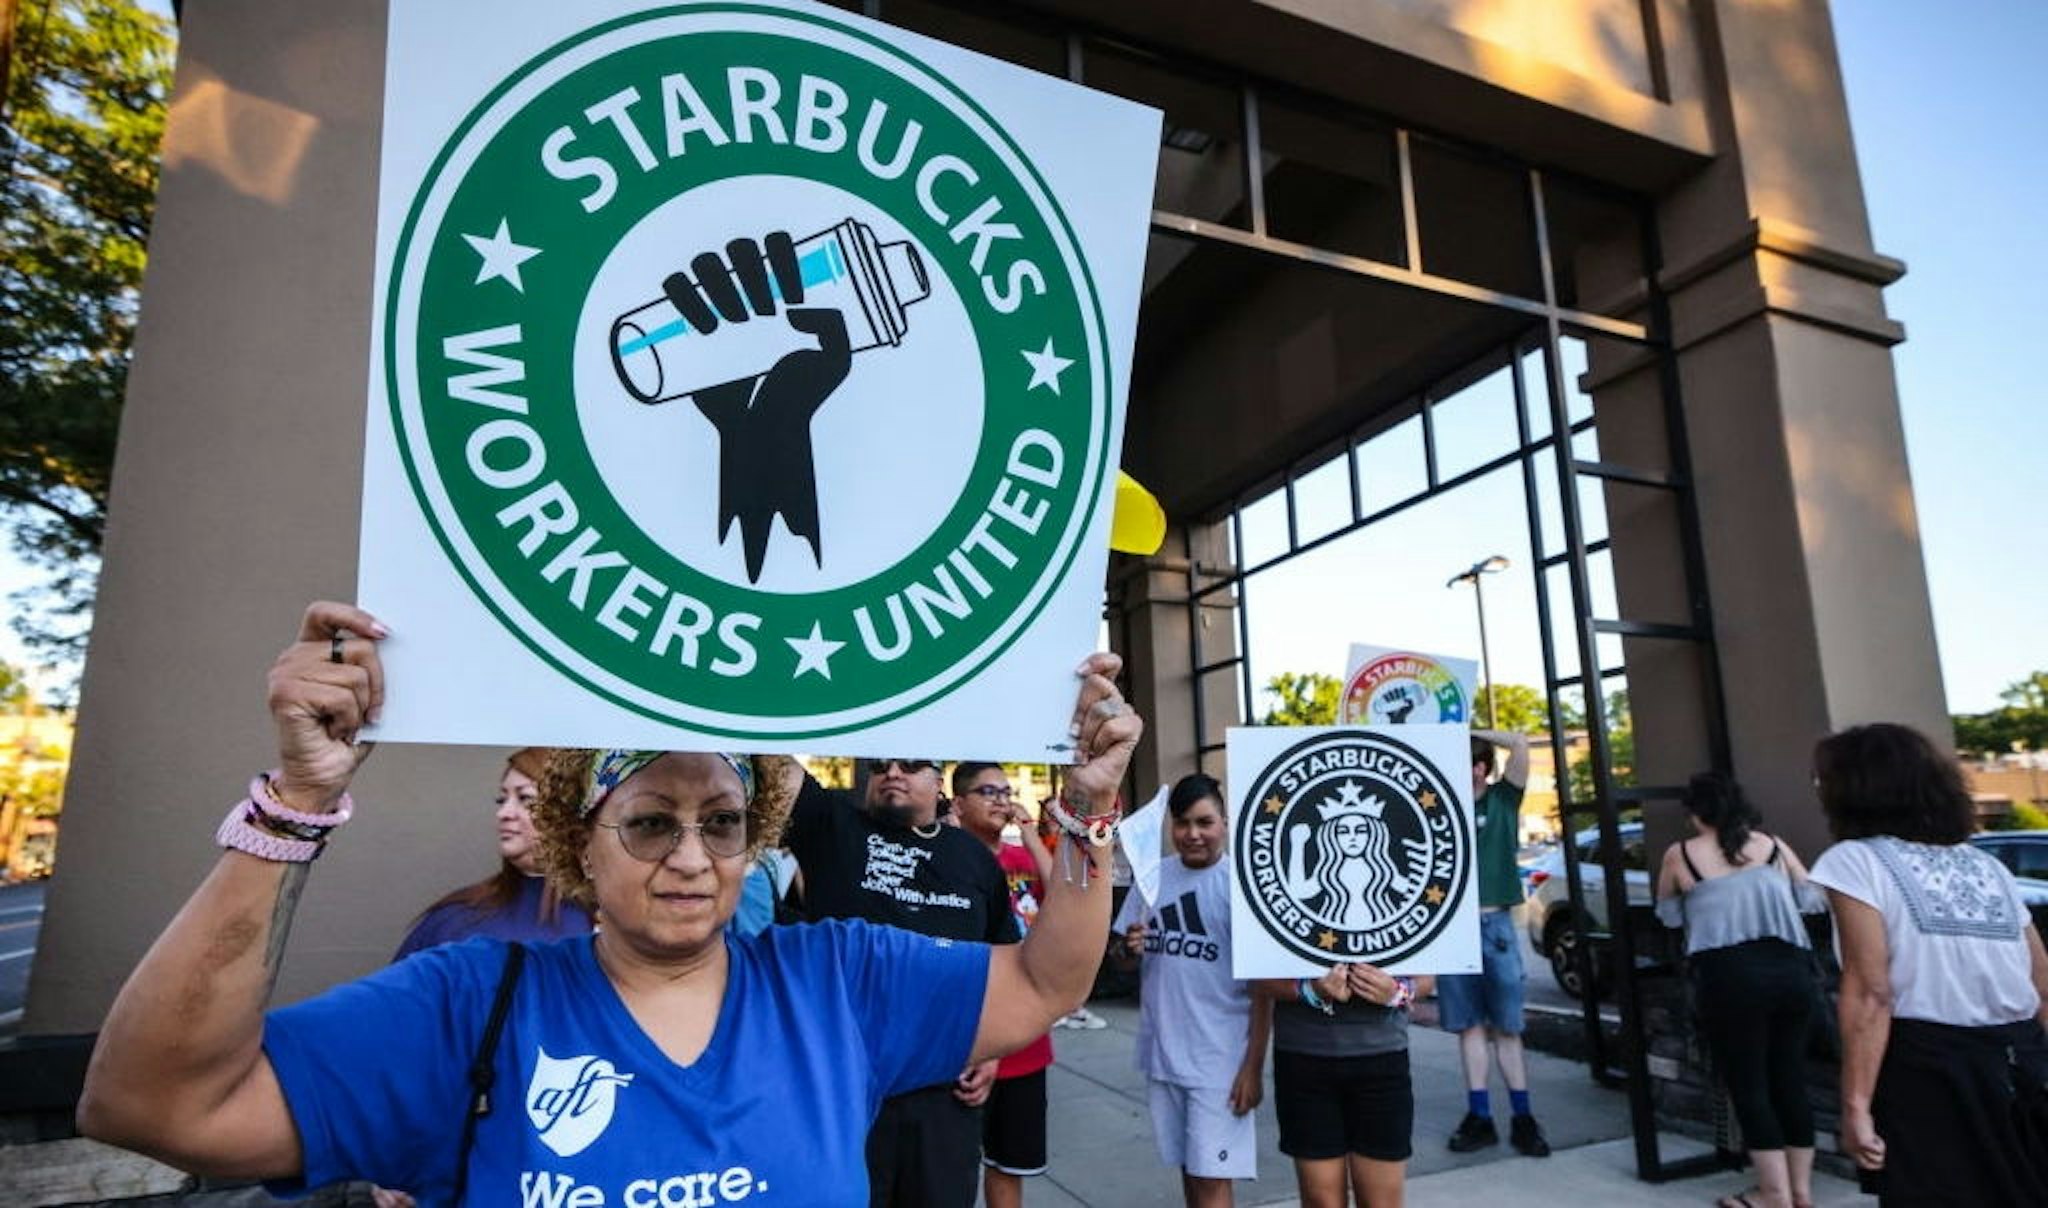 Great Neck, N.Y.: A woman holds up a sign as she joins other protestors in a rally against what they perceive to be union busting tactics, outside a Starbucks in Great Neck, New York, demanding the reinstatement of a former employee on August 15, 2022. (Photo by Thomas A. Ferrara/Newsday RM via Getty Images)